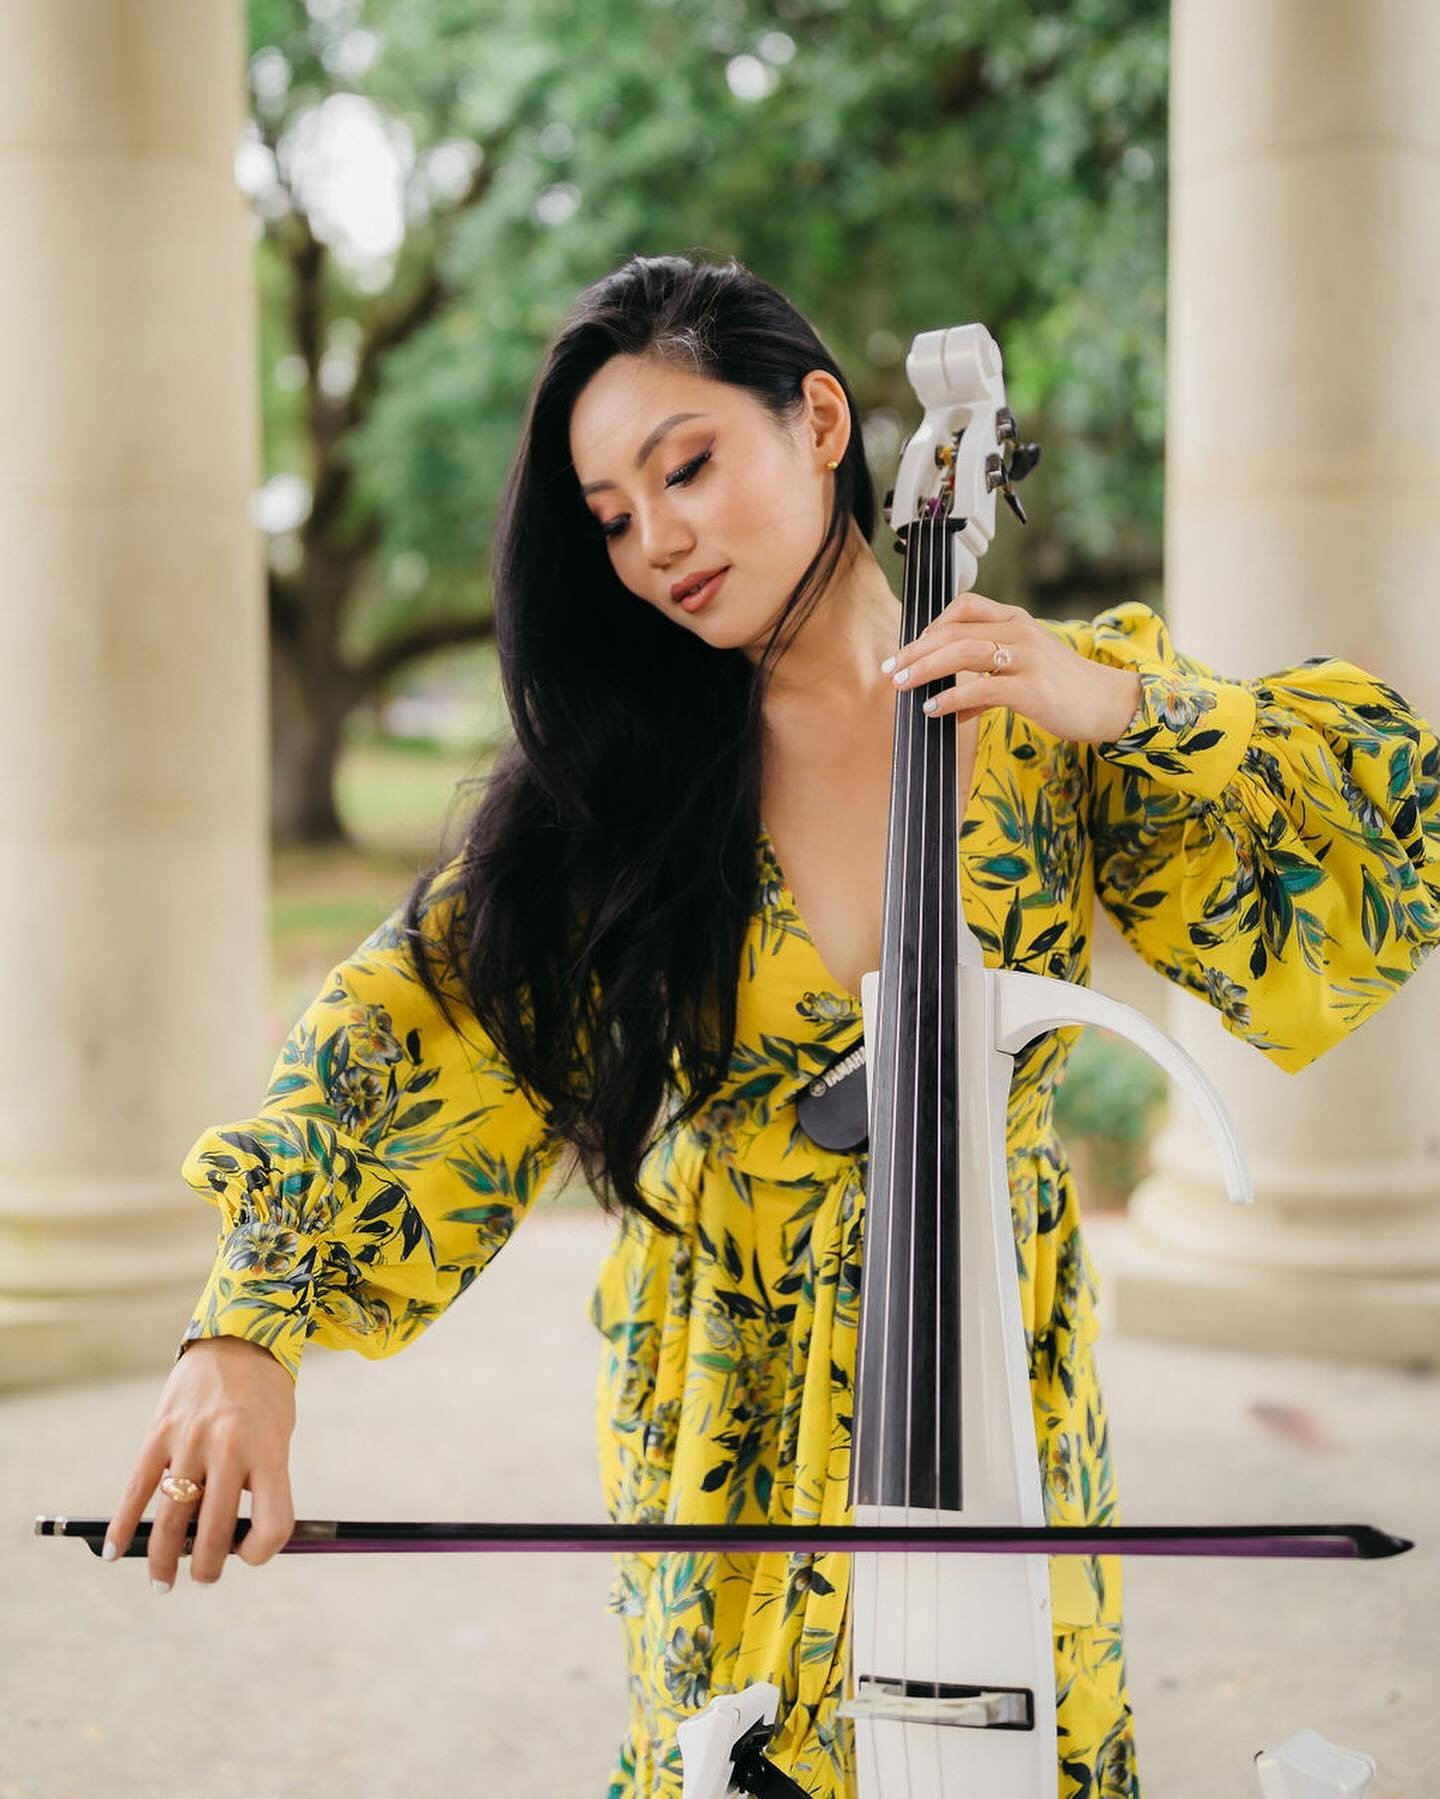 💛🍃 Beautiful New Orleans 
🎶 Greensleeves by @tinaguo &amp; @leozmusic 

#RCMemories #NOLA #NewOrleans #ElectricCello #Composer #TinaGuo